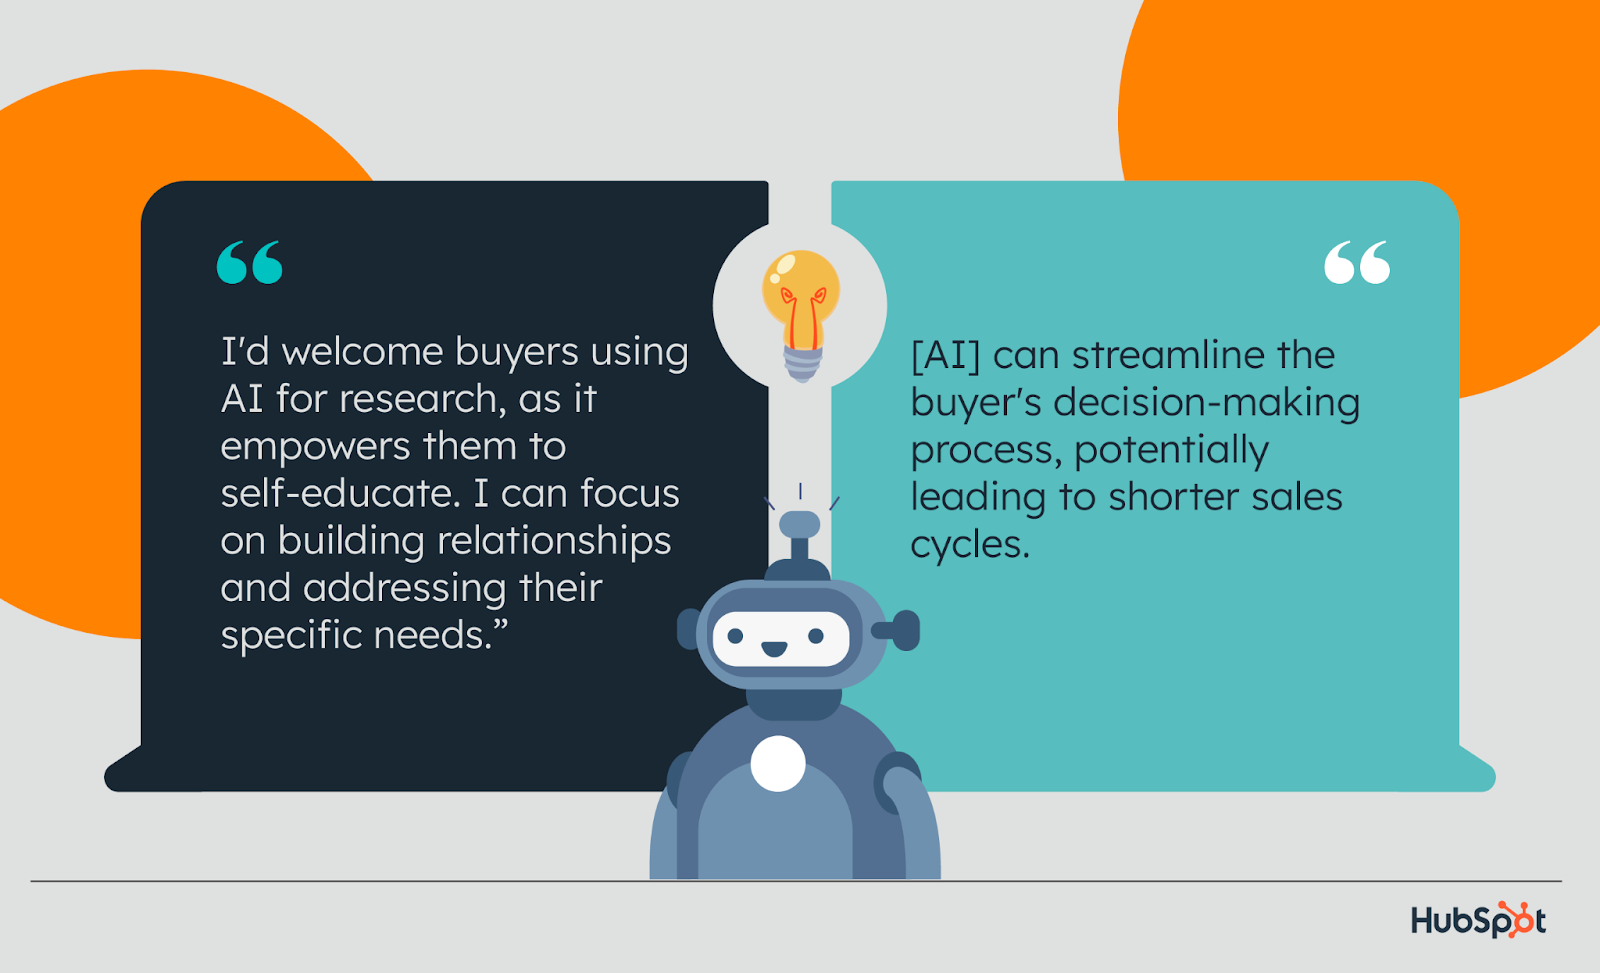 quotes from anonymous sales reps on AI